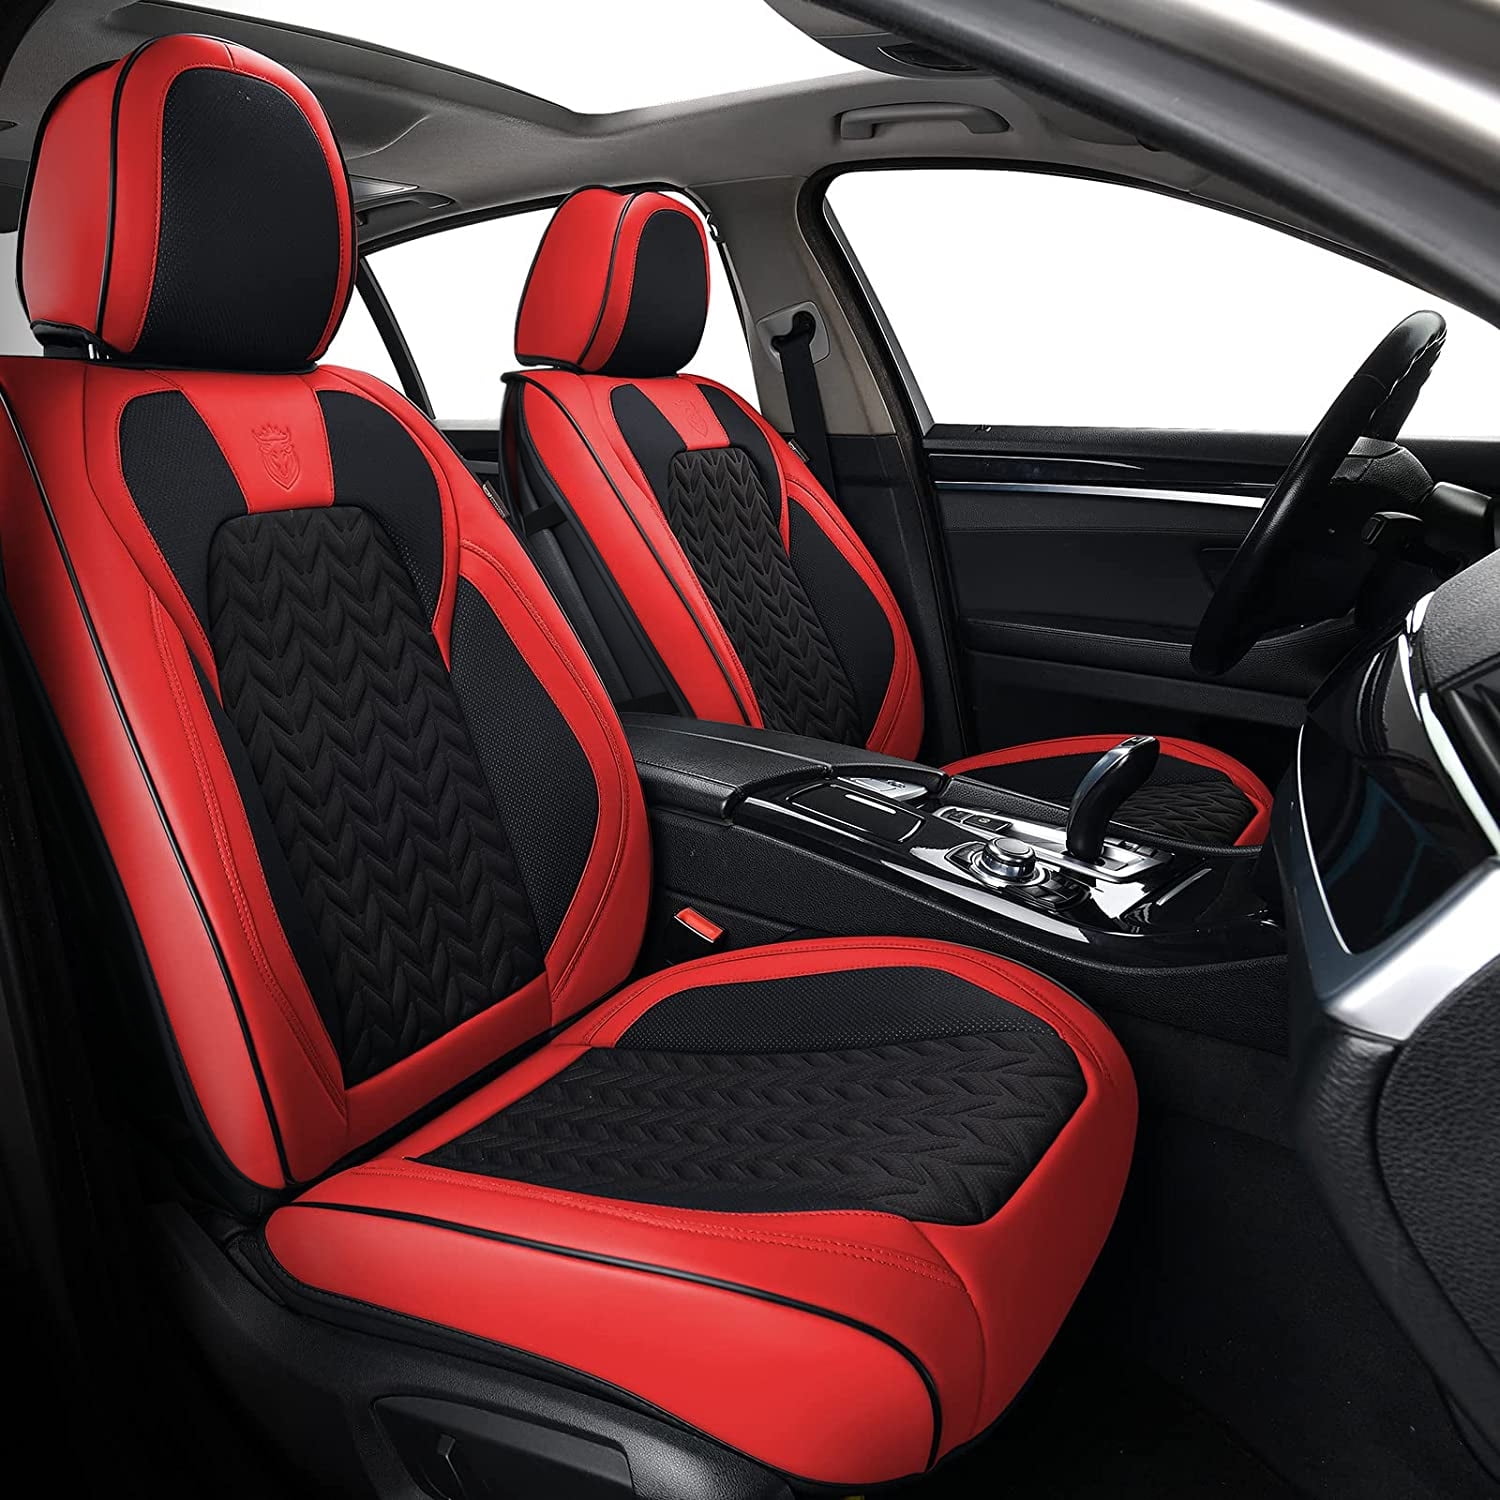 full set black/red leatherette/polyester Car seat covers fit Mercedes A Class 